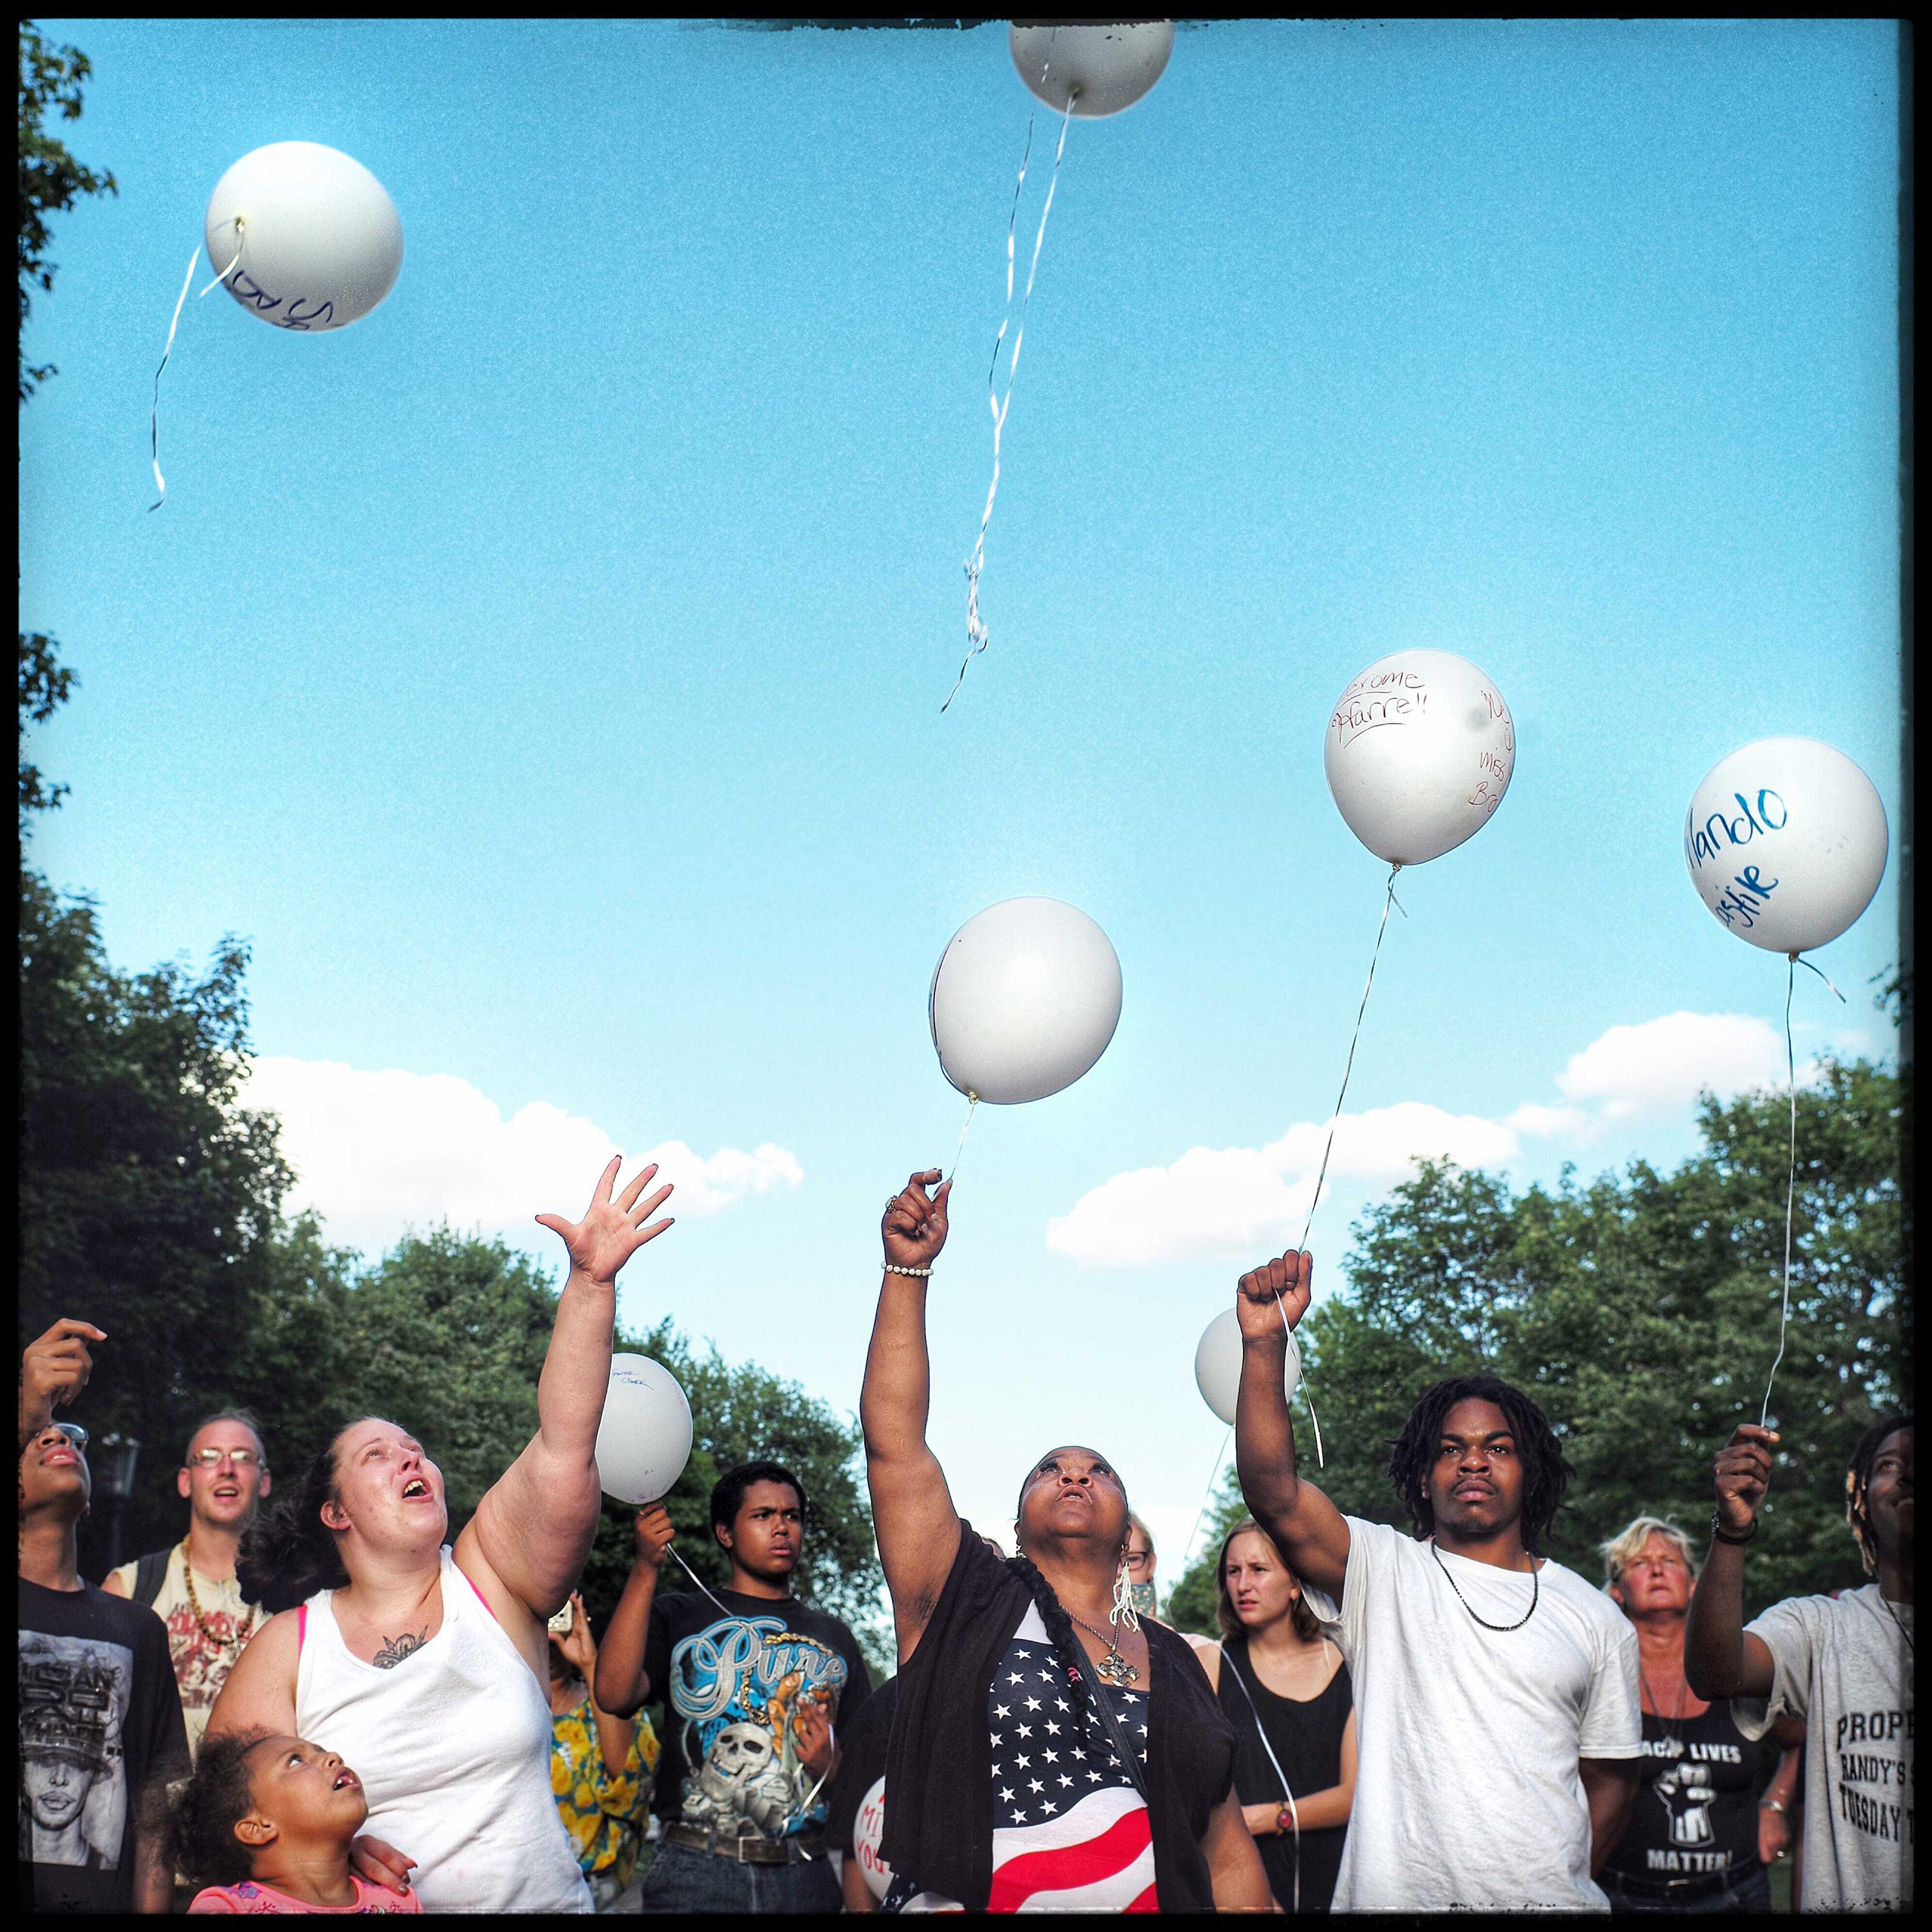 St. Paul, Minn.: Protestors who have set up camp
                              in front of the Governor's mansion in St Paul remembered
                              Philando Castile today with a 33-balloon salute on what would have been his 33rd birthday.